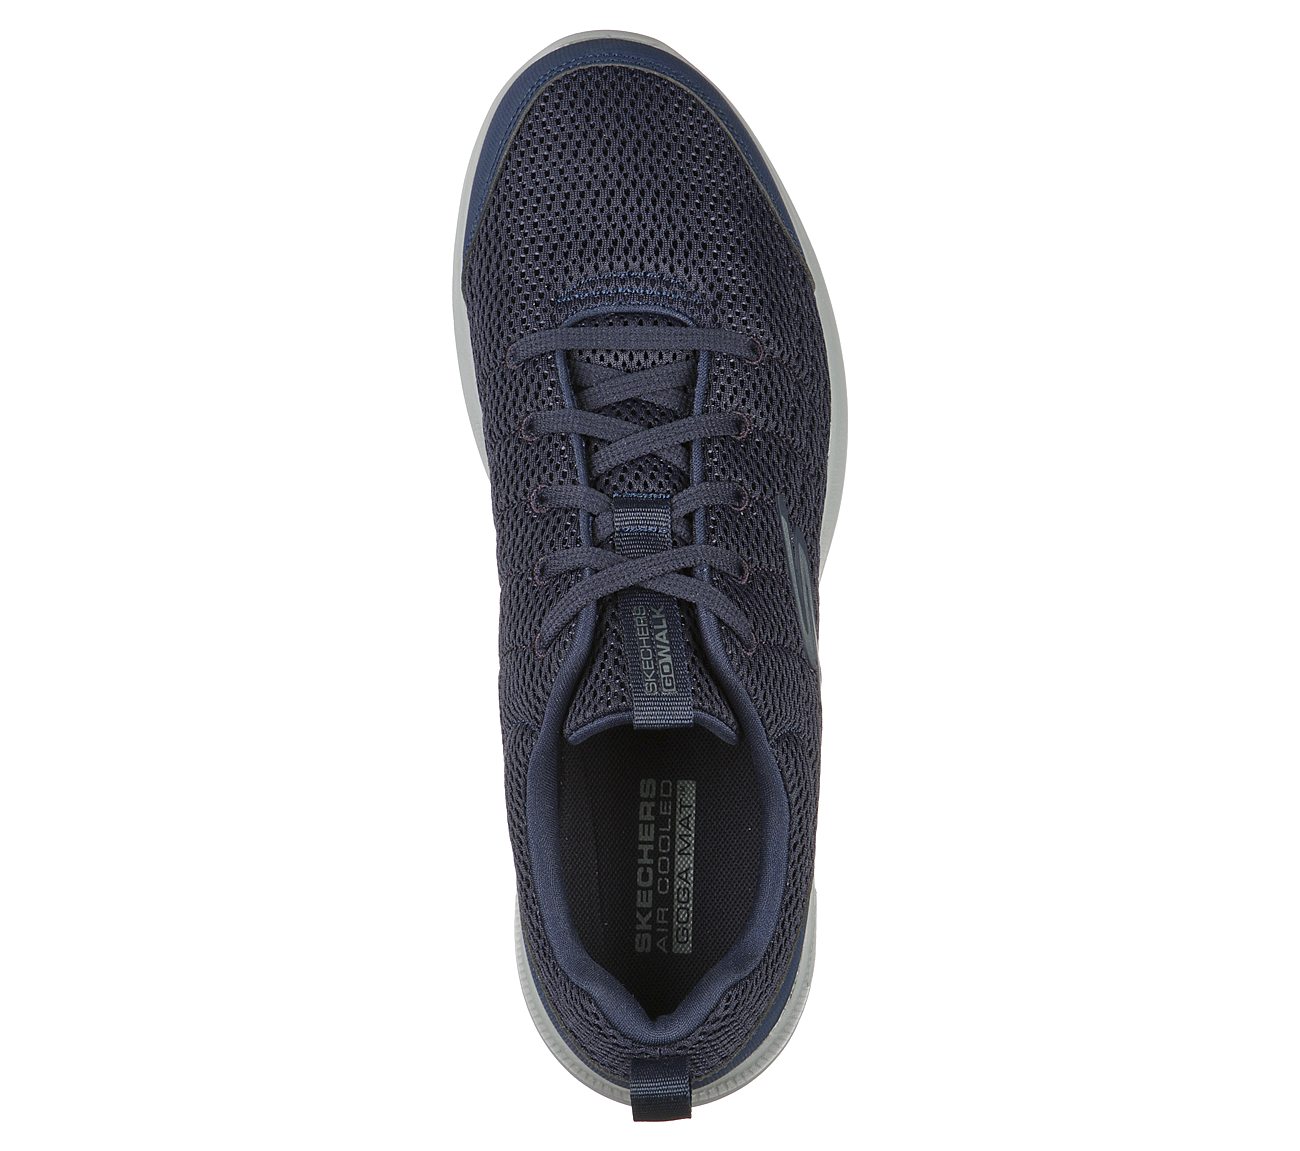 Skechers Navy Go Walk Stability Advanceme Mens Lace Up Shoes - Style ID ...